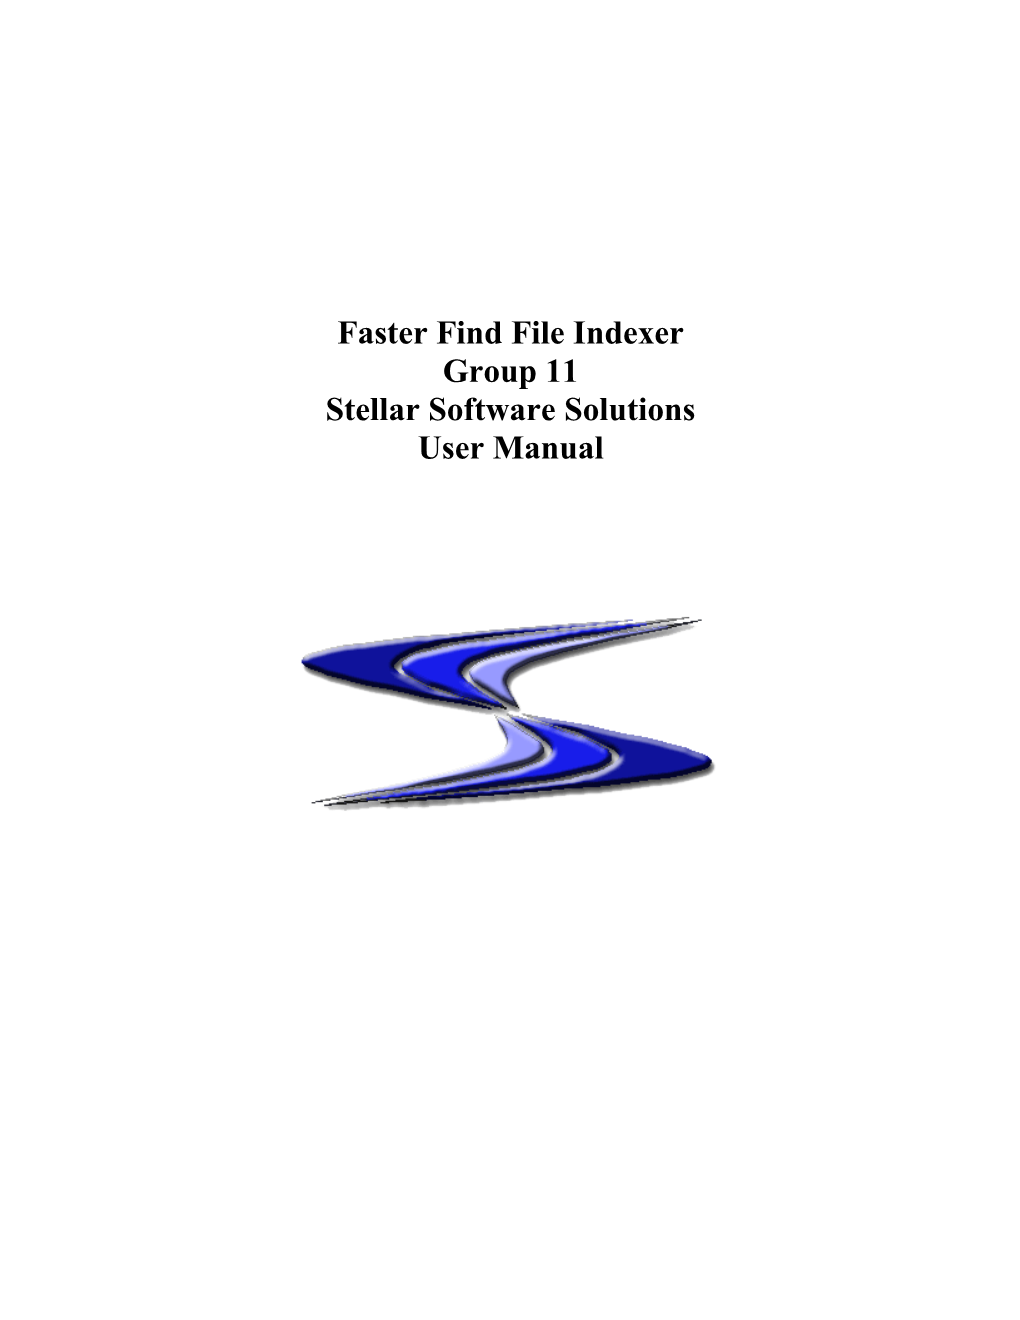 Faster Find File Indexer